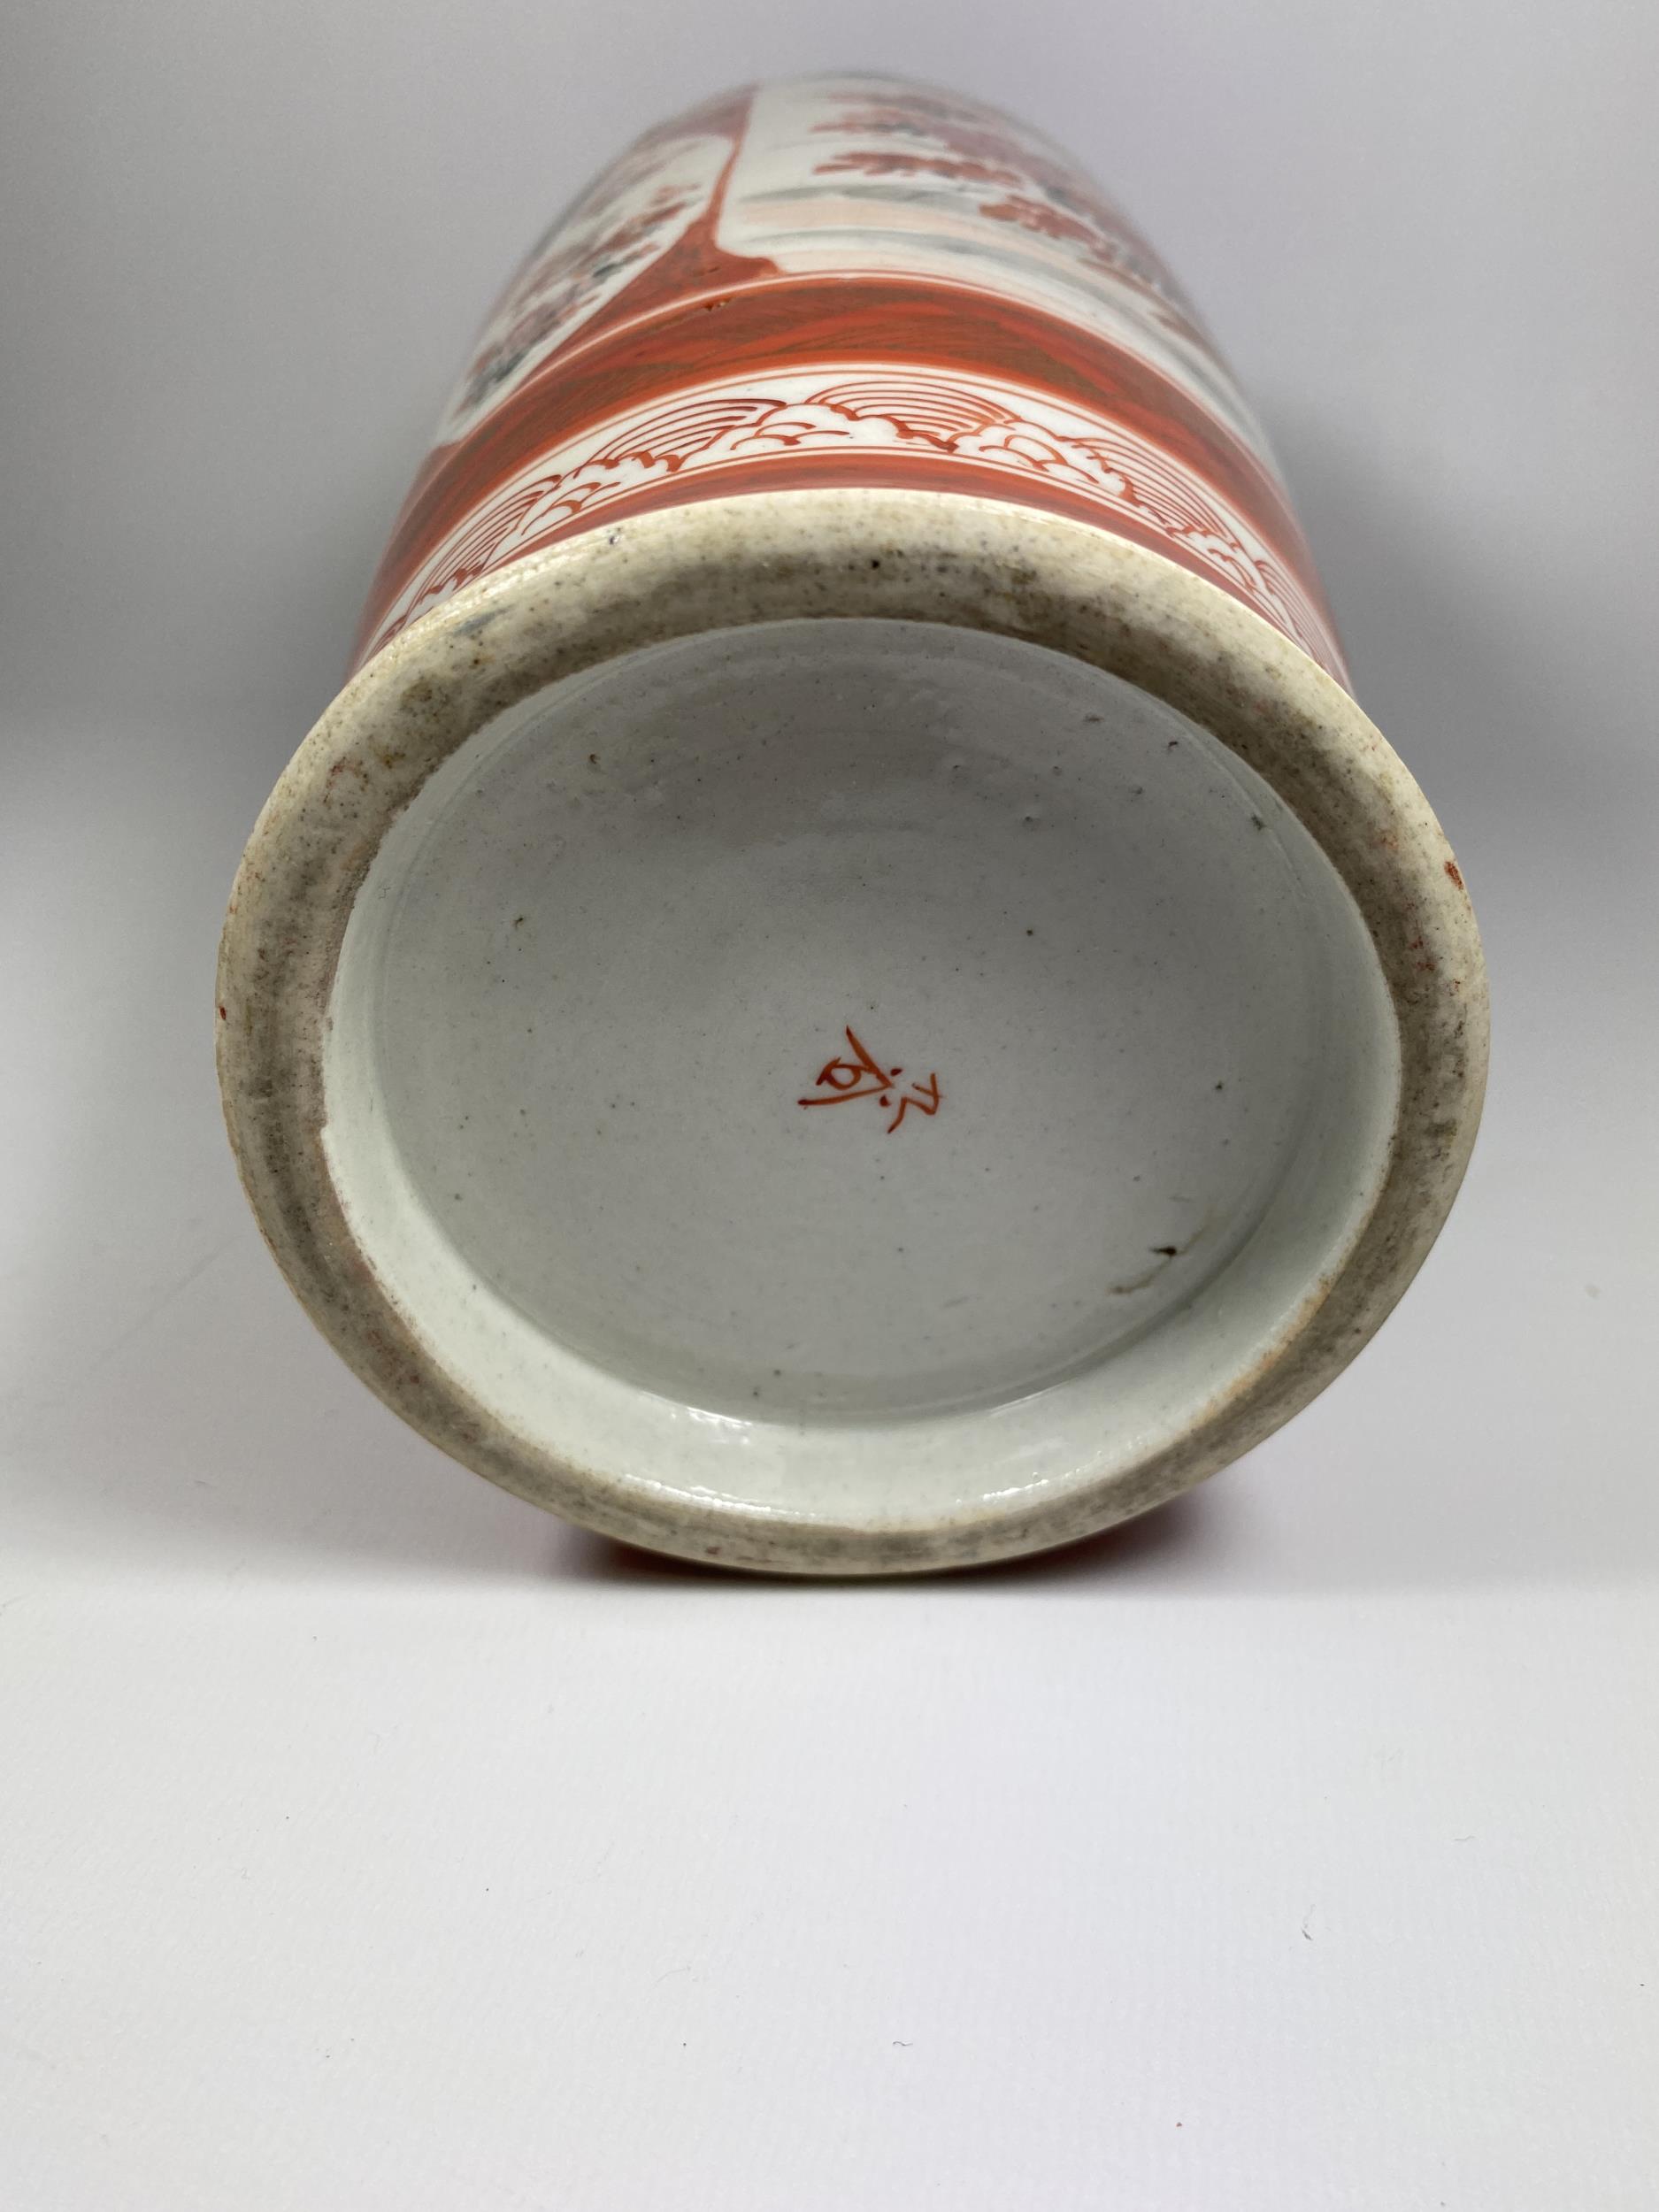 A LARGE JAPANESE KUTANI WARE VASE WITH TEMPLE FIGURAL TEMPLE DESIGN, CHARACTER MARKS TO BASE, HEIGHT - Image 5 of 5